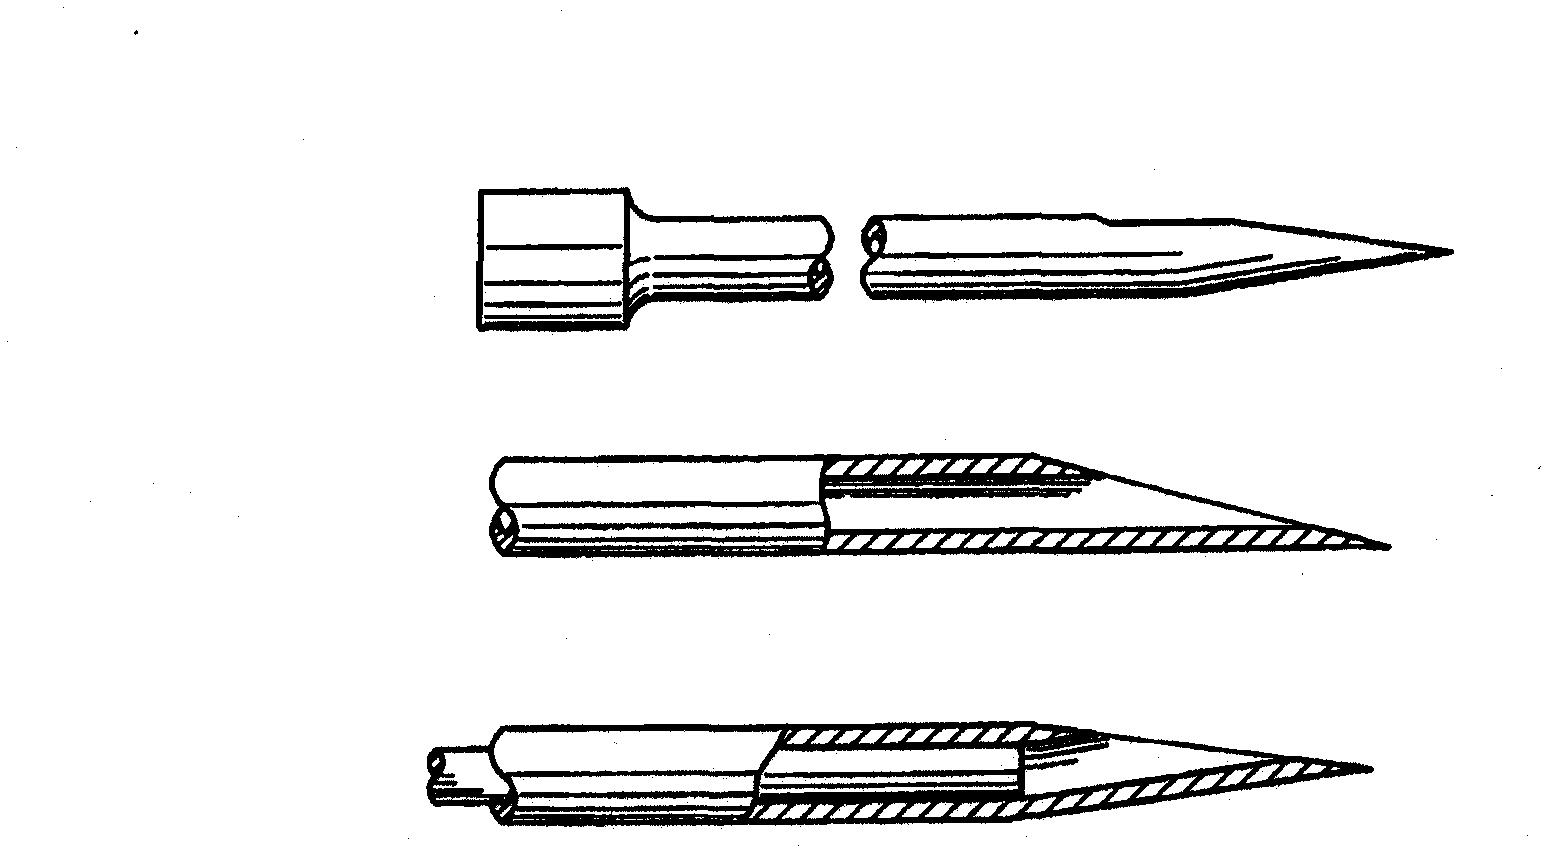 Needle for subcutaneous port